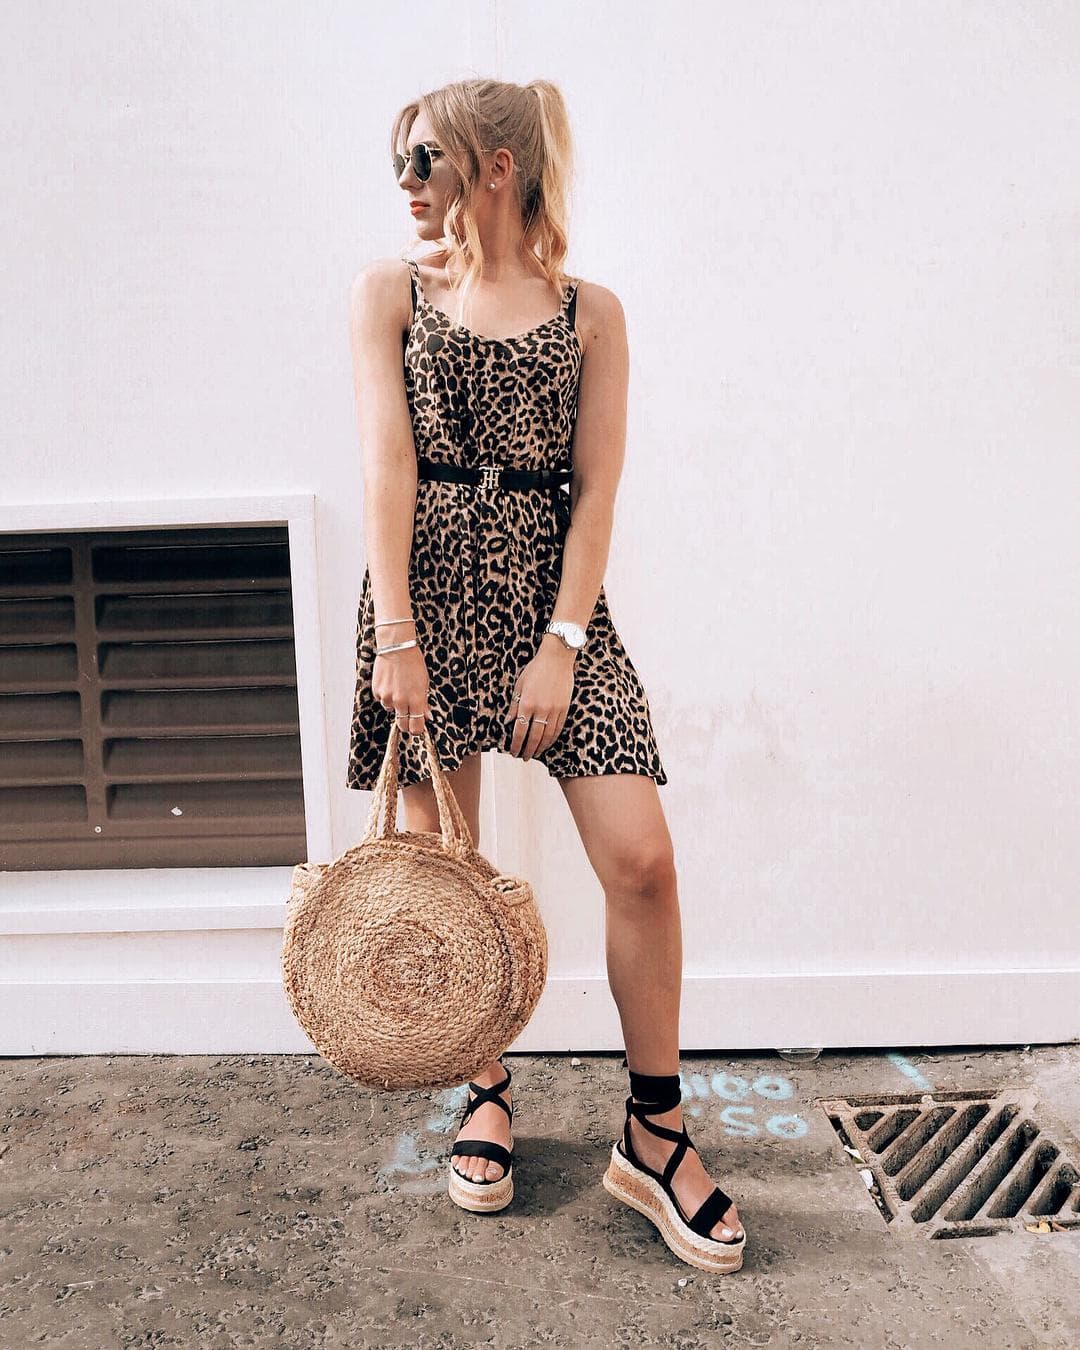 An image of a woman in a animal print dress wearing a pair of black flatform espadrilles